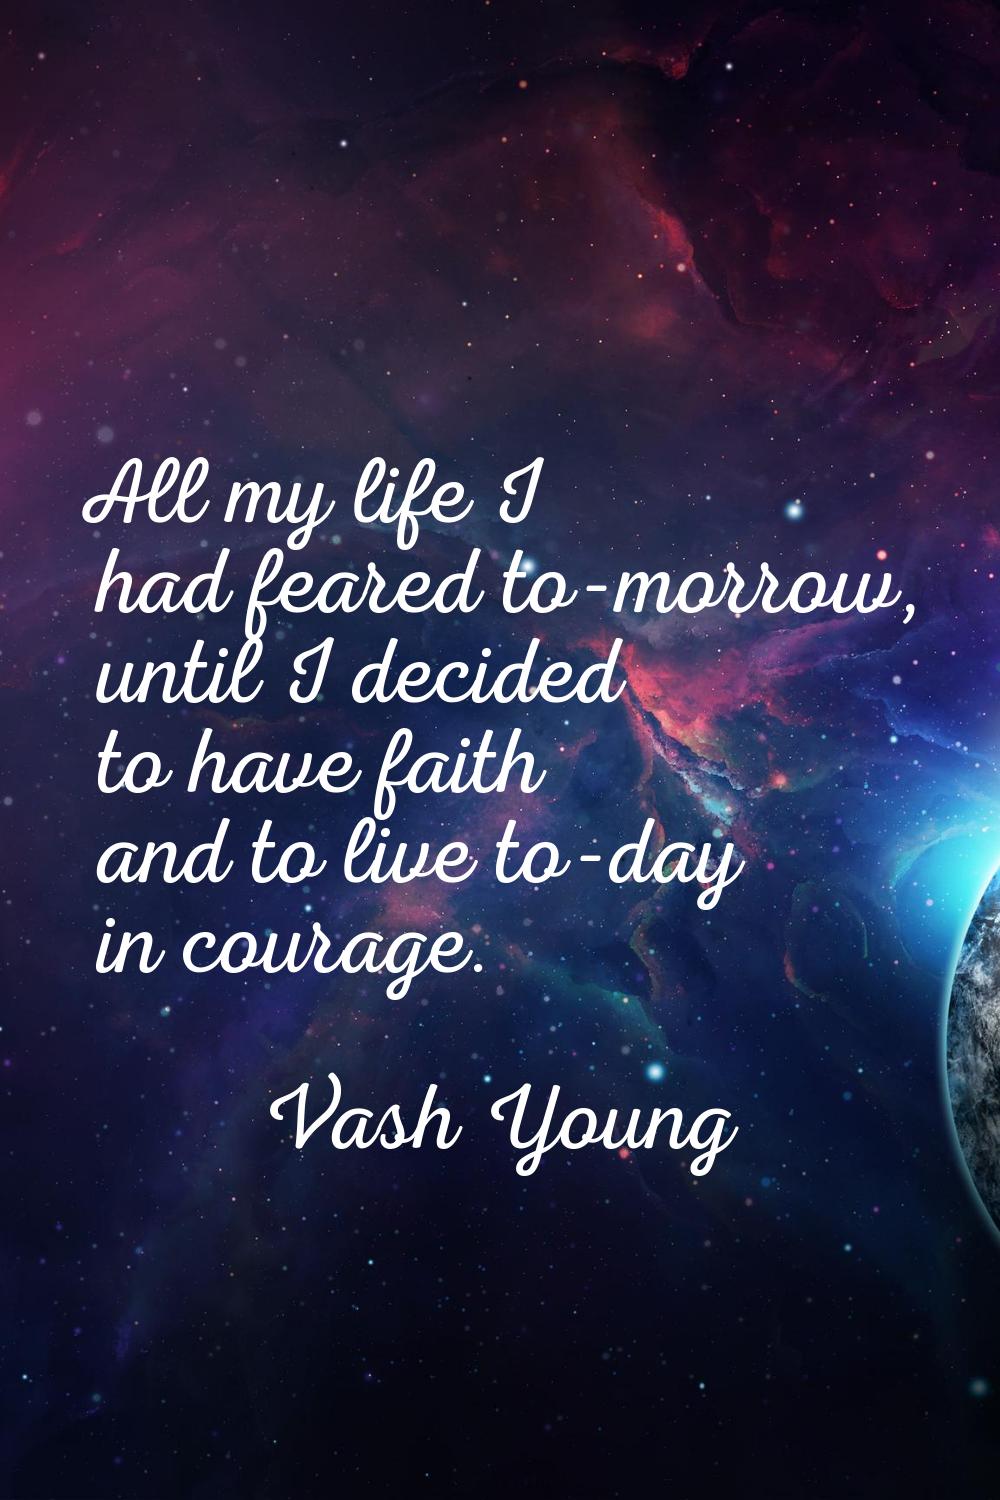 All my life I had feared to-morrow, until I decided to have faith and to live to-day in courage.